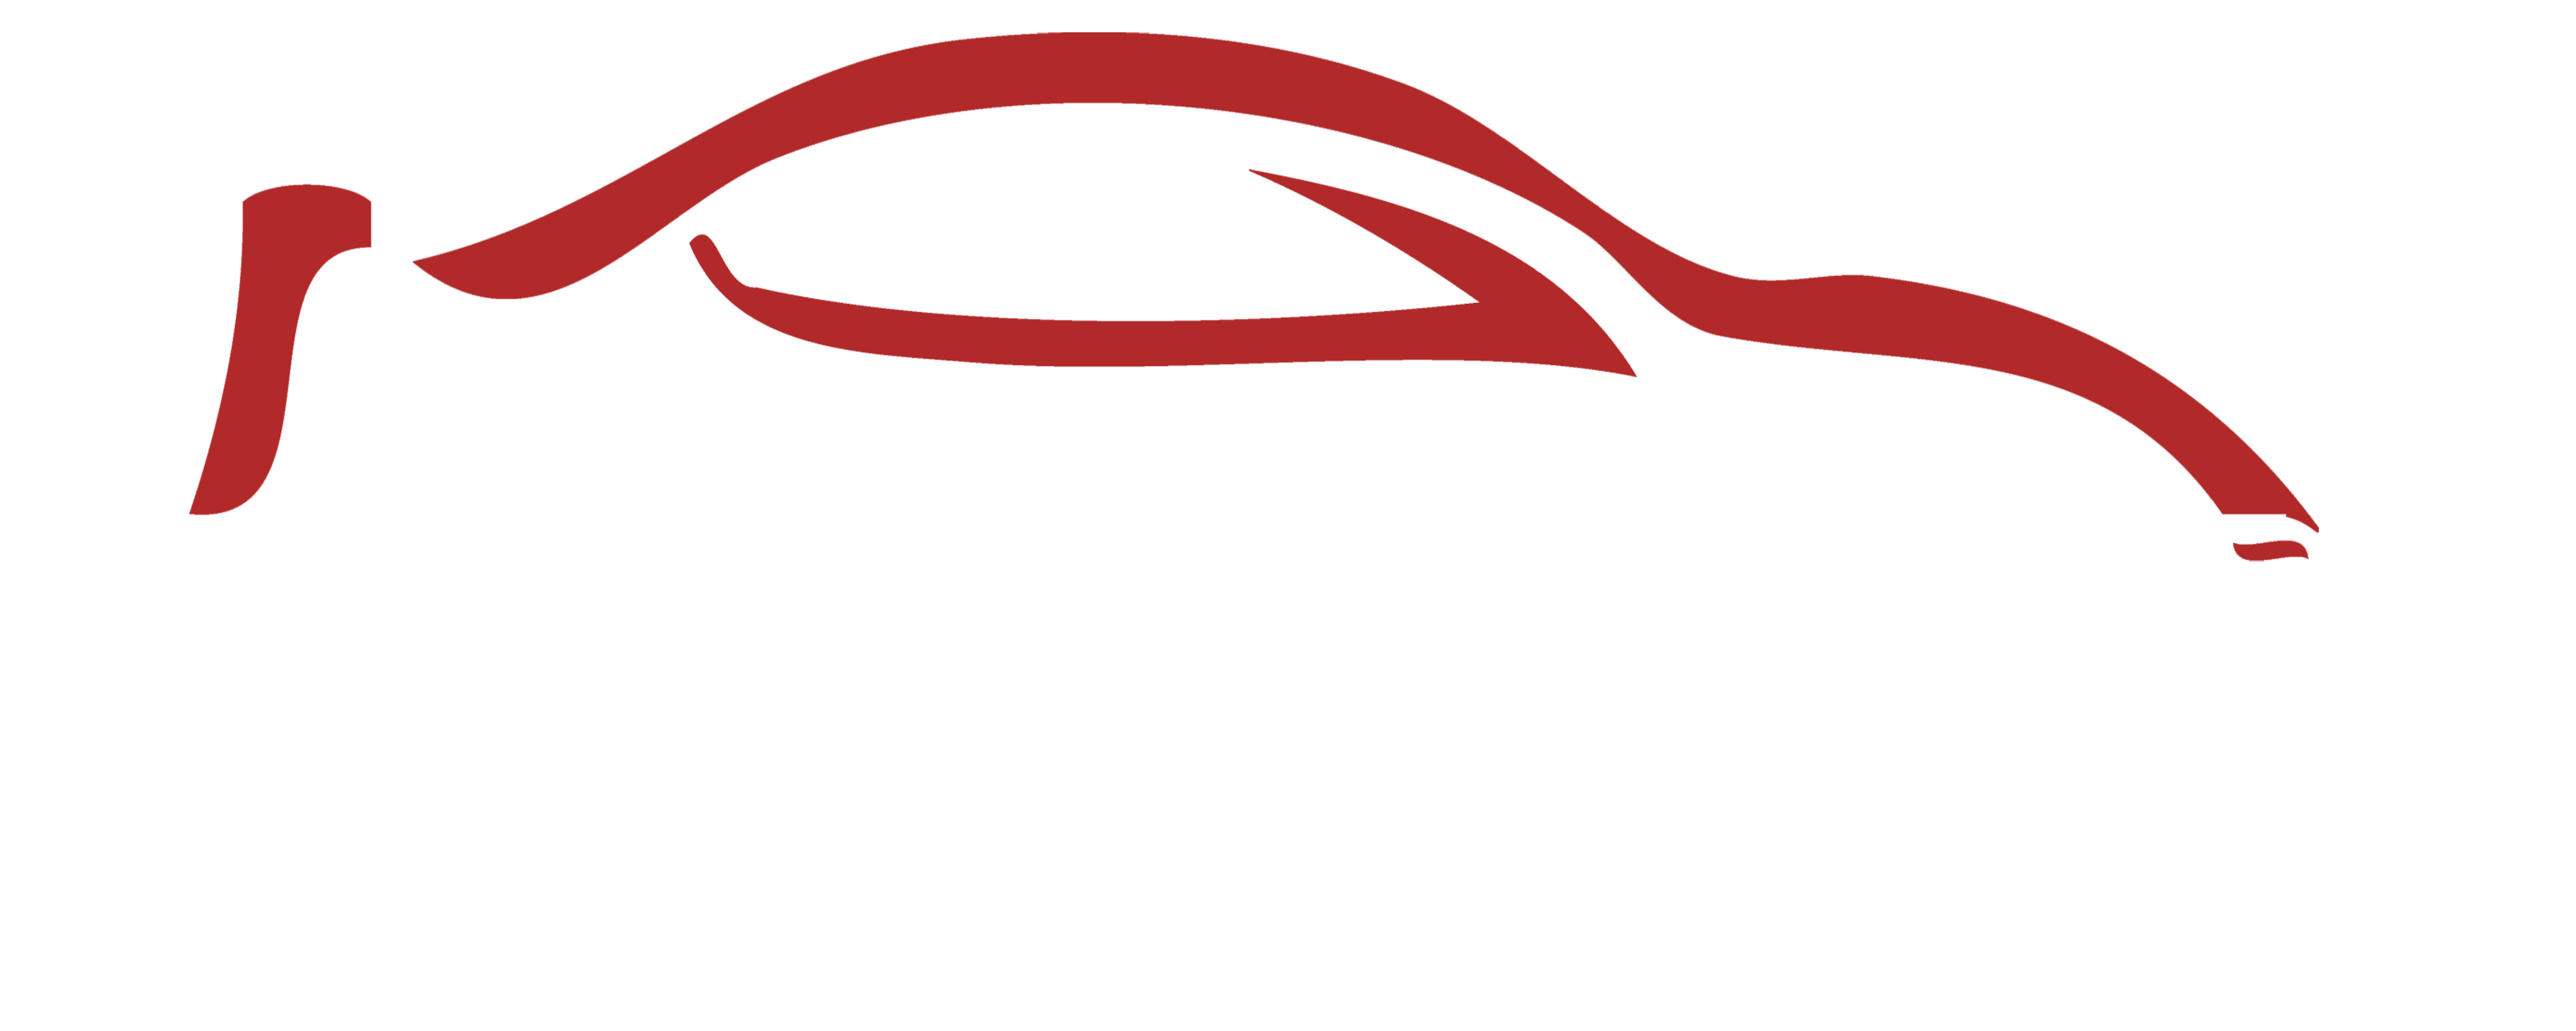 Maidstone Driving Academy